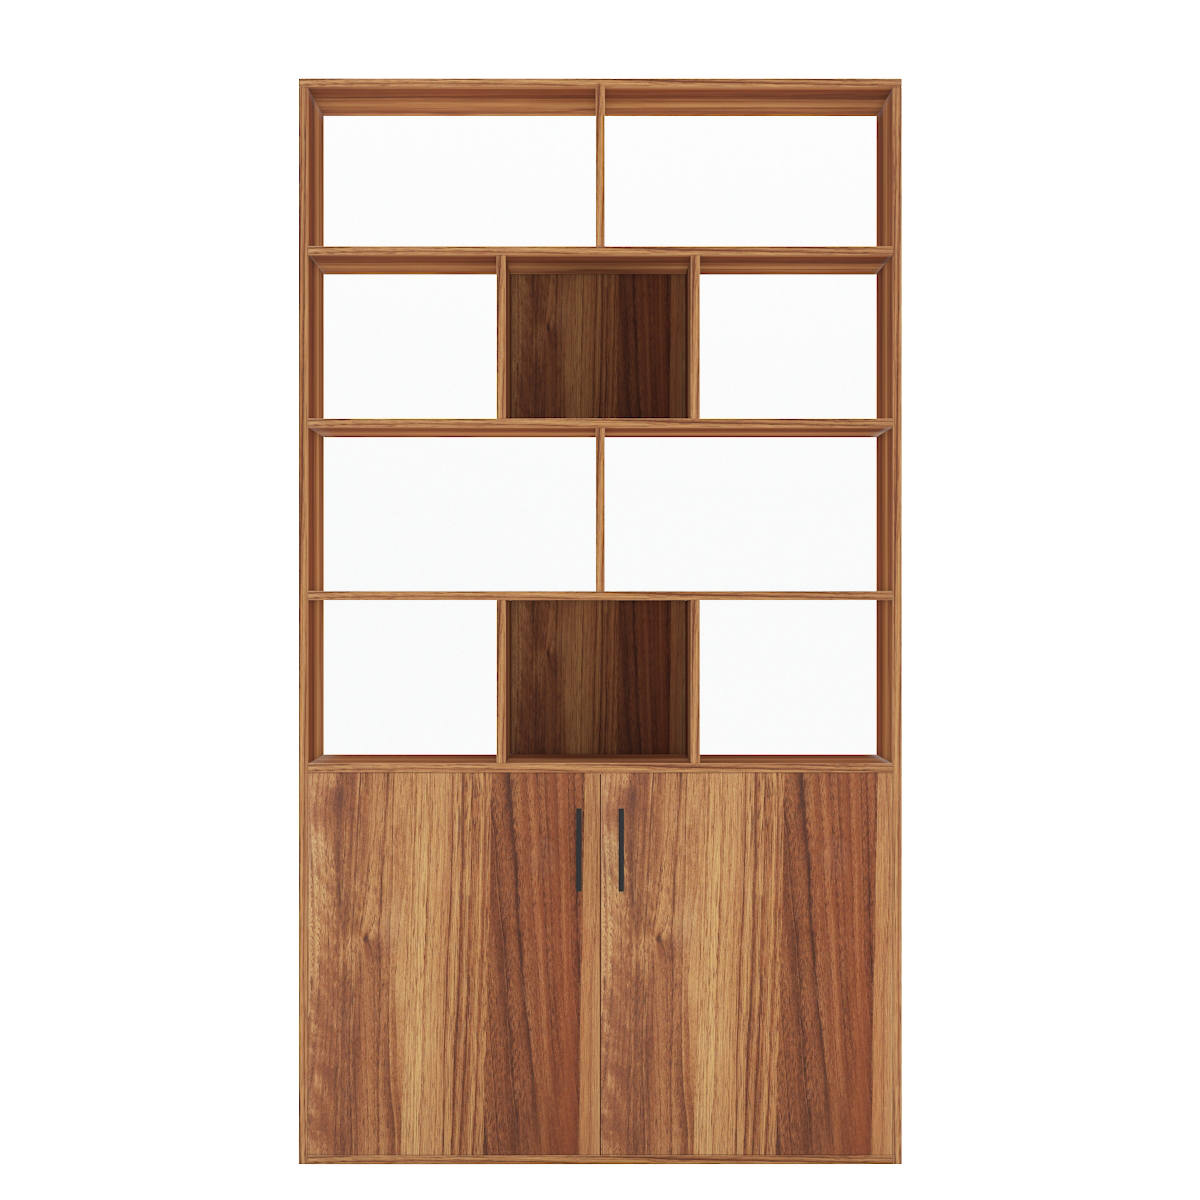 Find Black/White/Oak/ Dark Cherry/Walnut Wooden Bookcase Storage Bookcase with Door Storage Finishing Bookcase for Sale on Gipsybee.com with cryptocurrencies